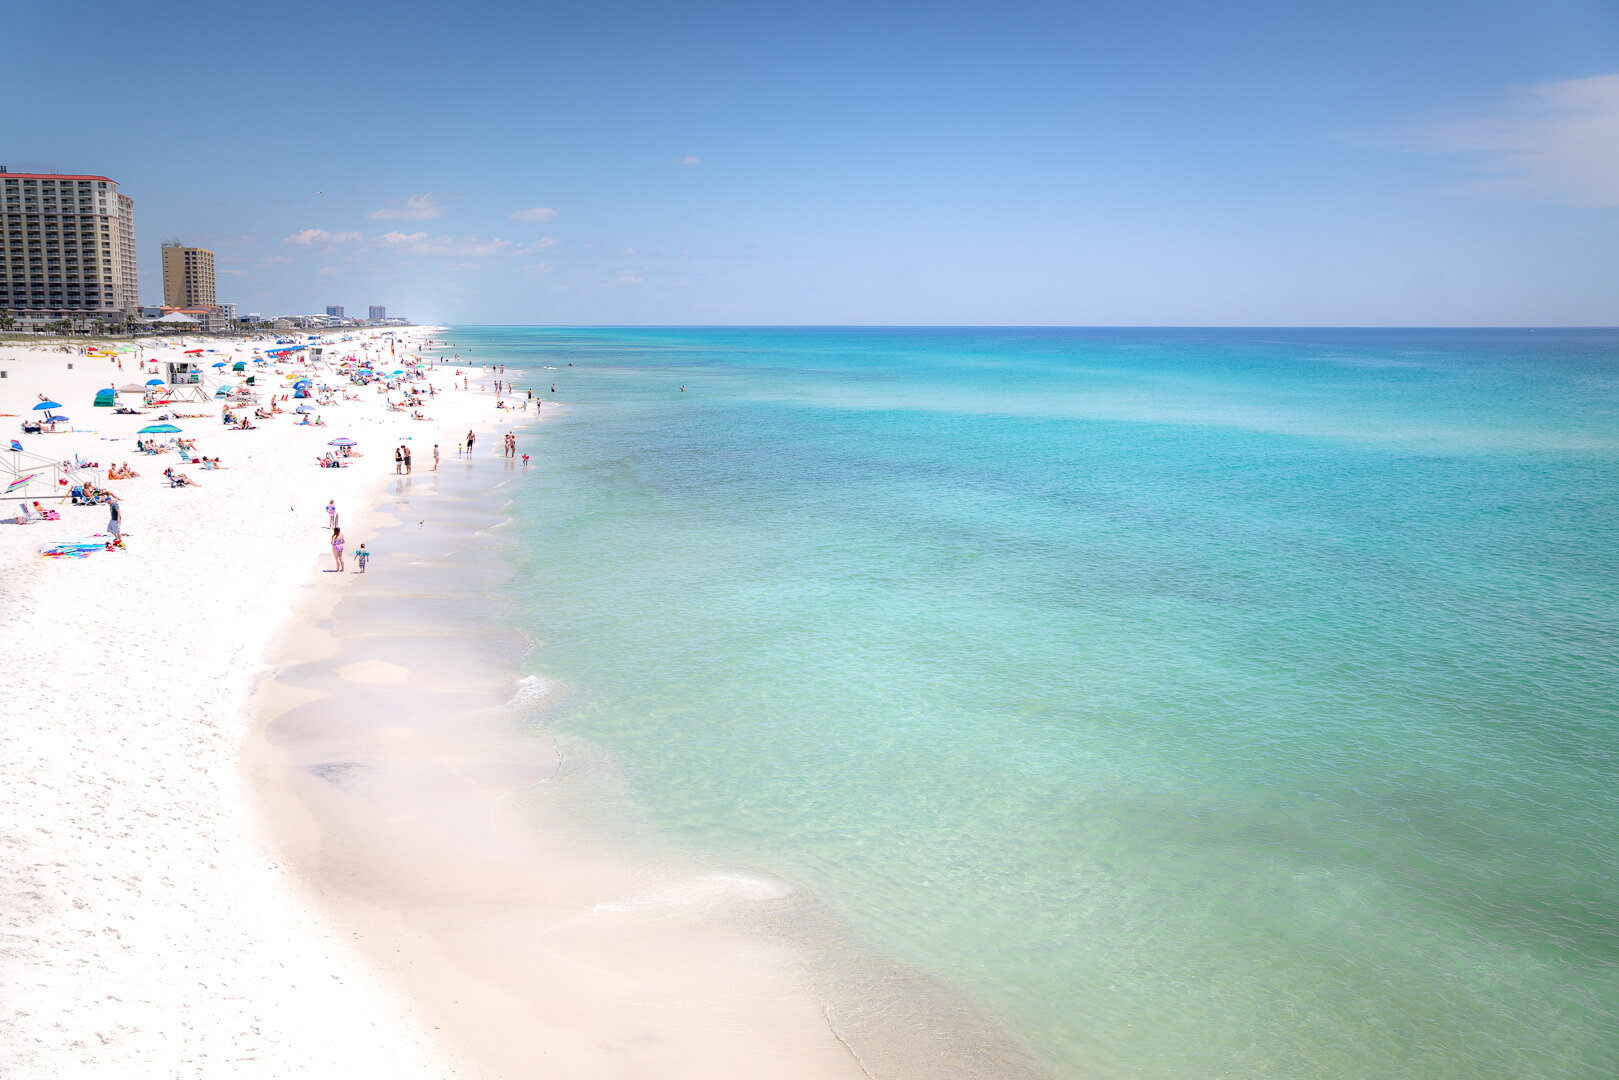 The view of Pensacola Beach from the enormous peer that jets out into The Gulf.